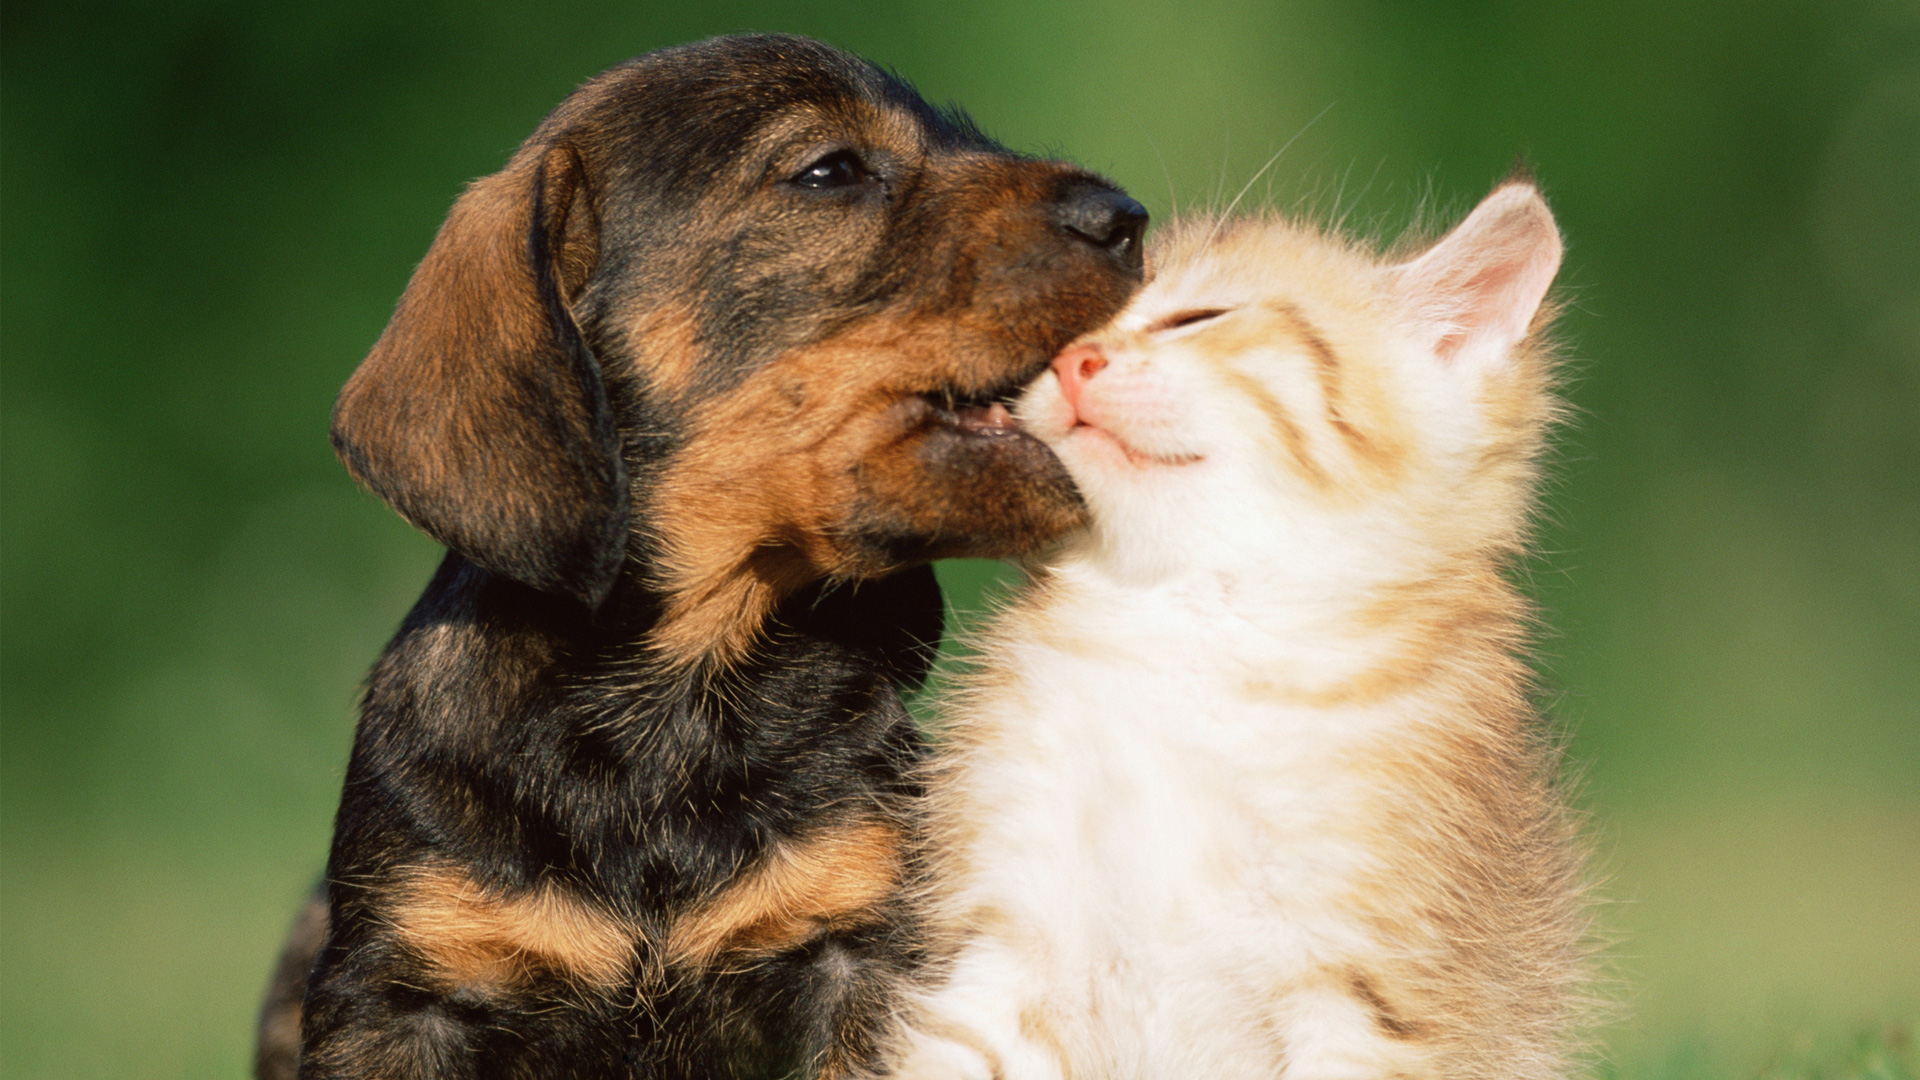 Pics Of Puppies And Kittens For Your Pc Most Romantic Images